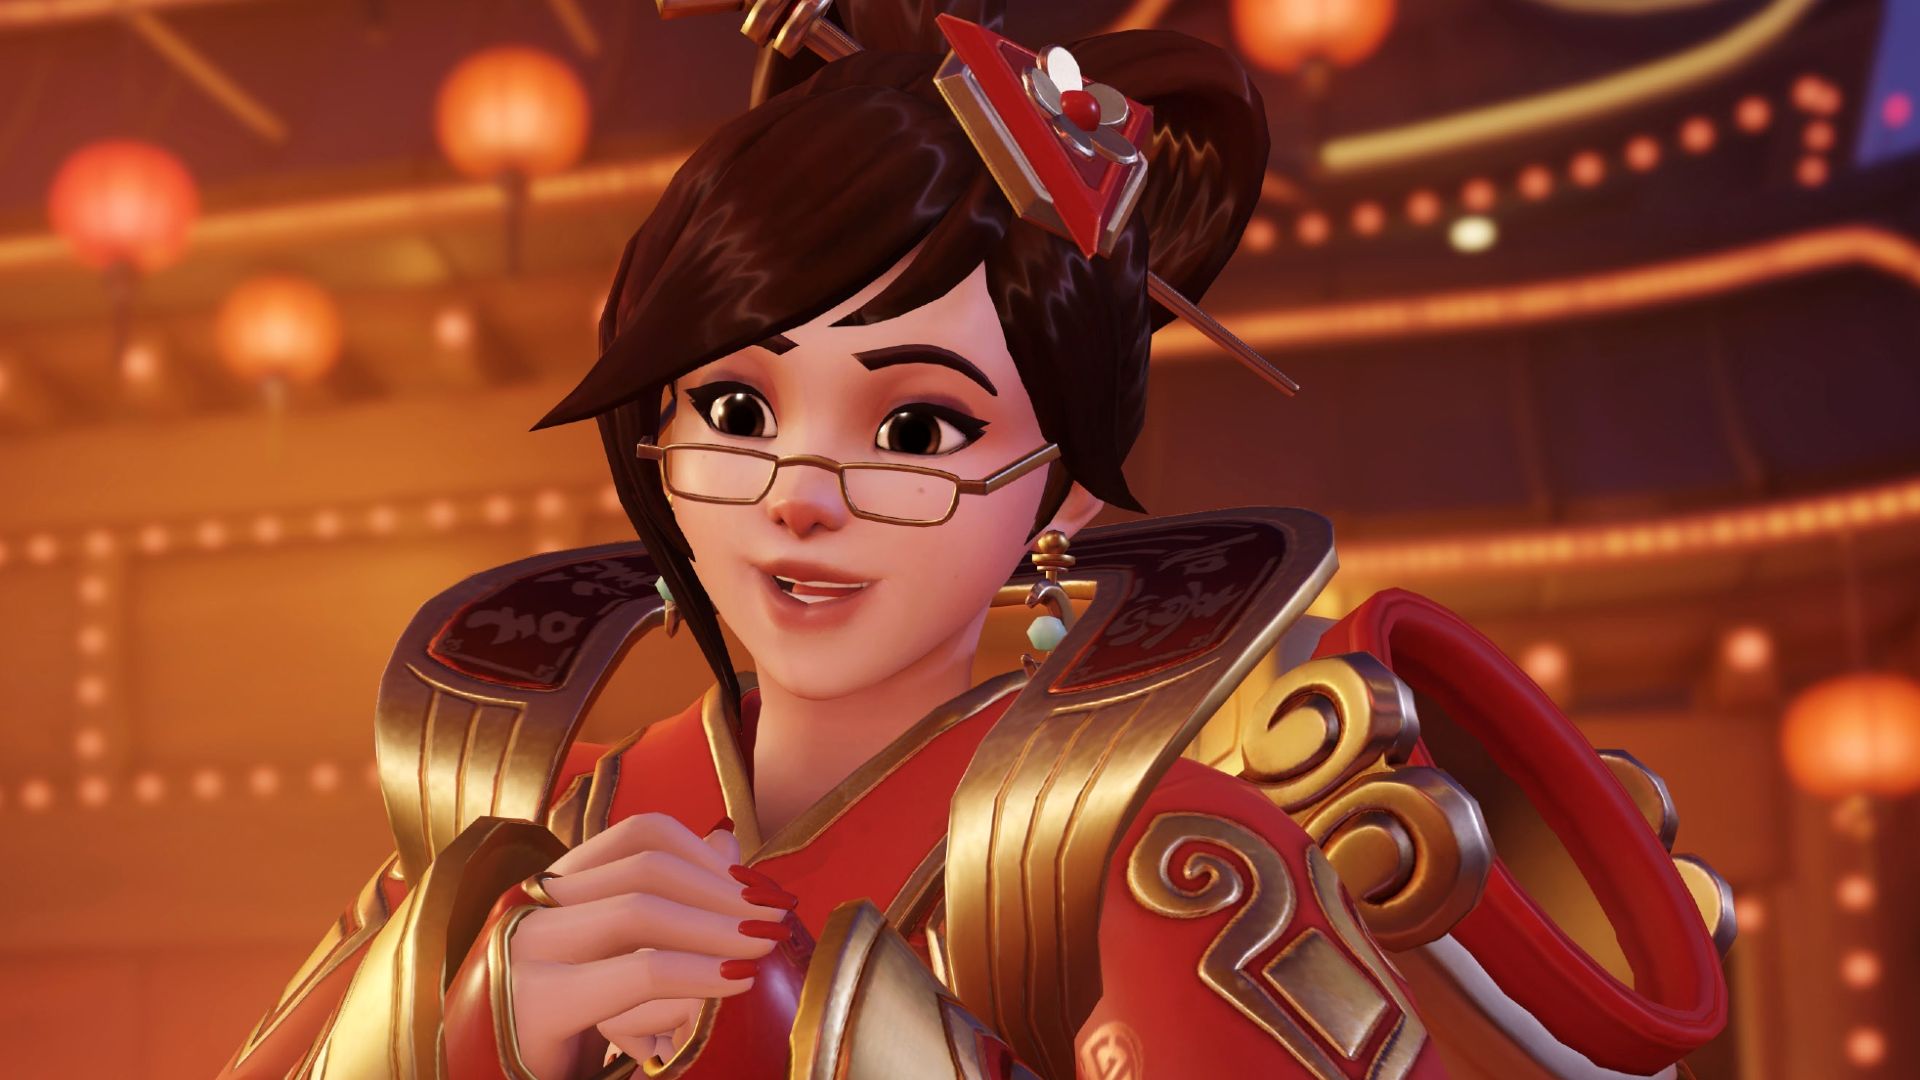 Overwatch 2 Lunar New Year 2023 release date, skins, and challenges